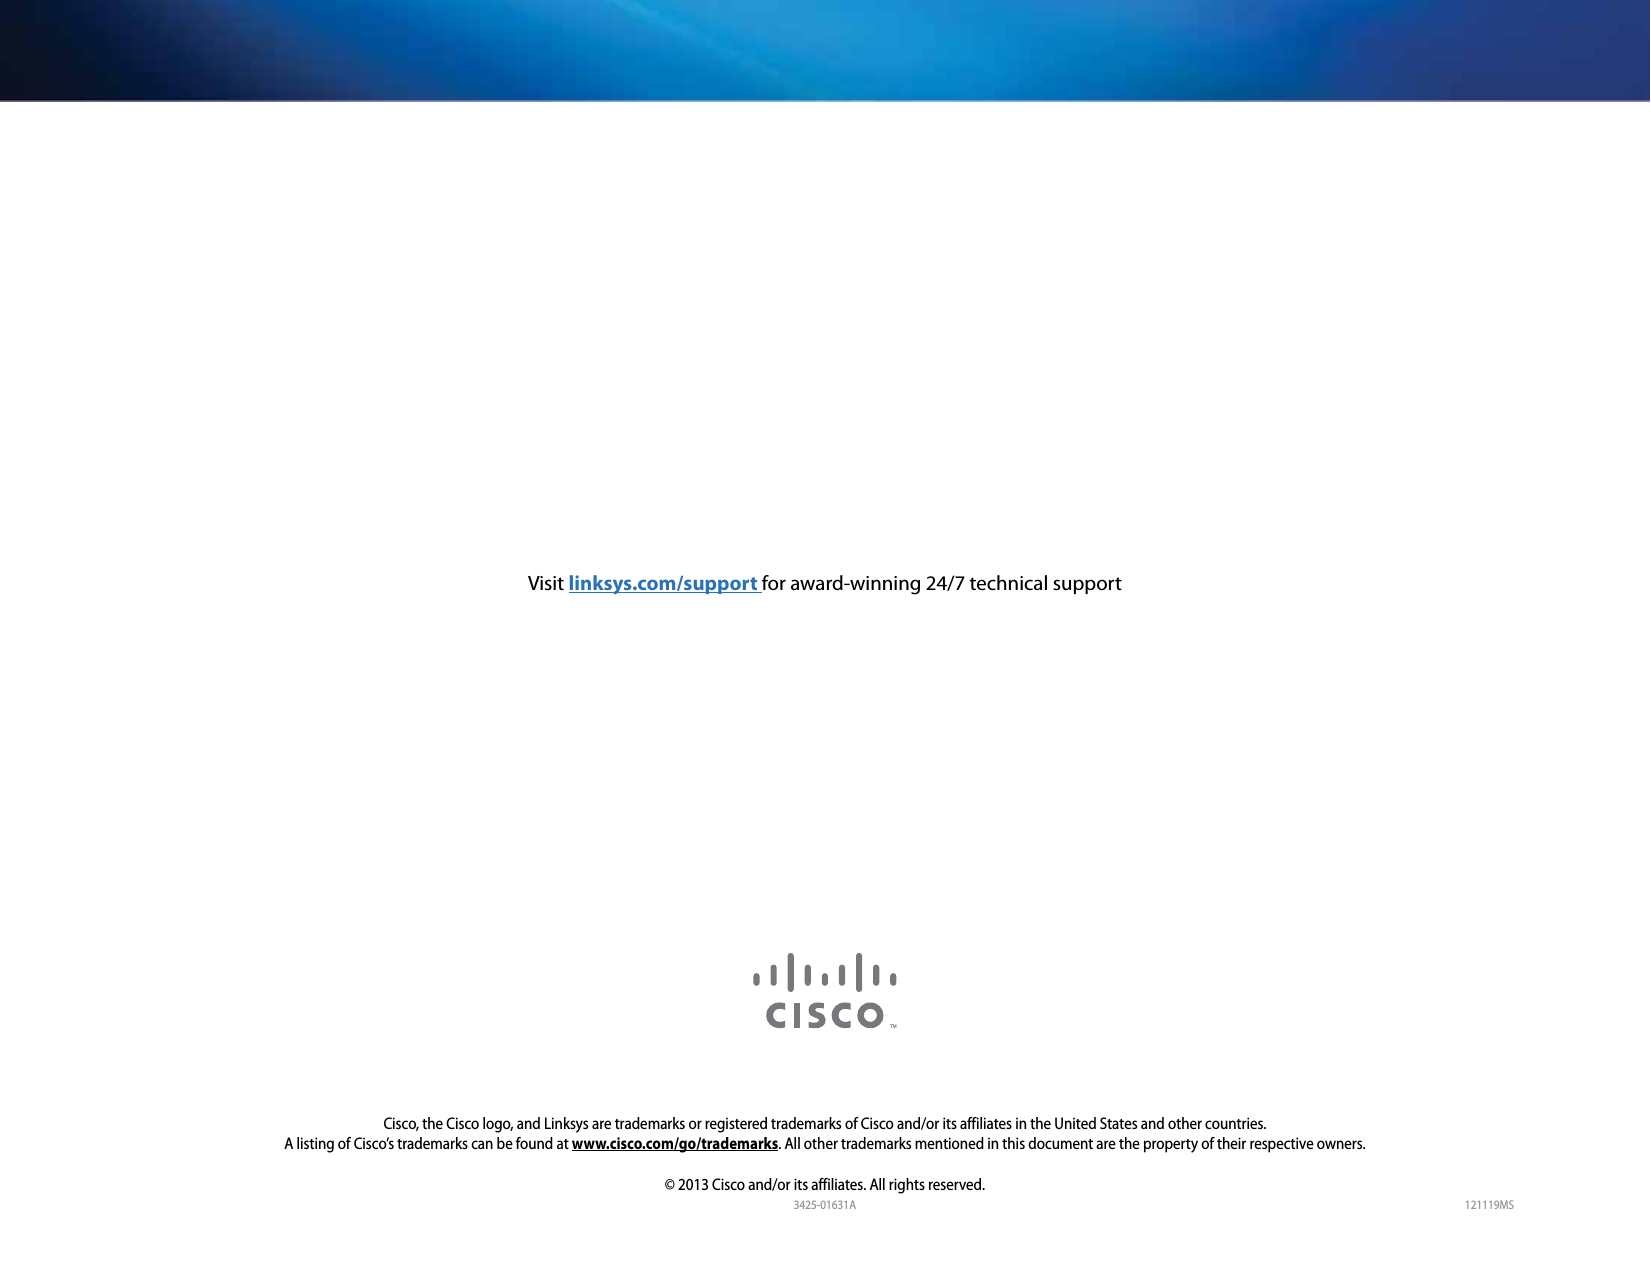 3425-01631A 121119MSCisco, the Cisco logo, and Linksys are trademarks or registered trademarks of Cisco and/or its affiliates in the United States and other countries. A listing of Cisco’s trademarks can be found at www.cisco.com/go/trademarks. All other trademarks mentioned in this document are the property of their respective owners.© 2013 Cisco and/or its affiliates. All rights reserved.Visit linksys.com/support for award-winning 24/7 technical support